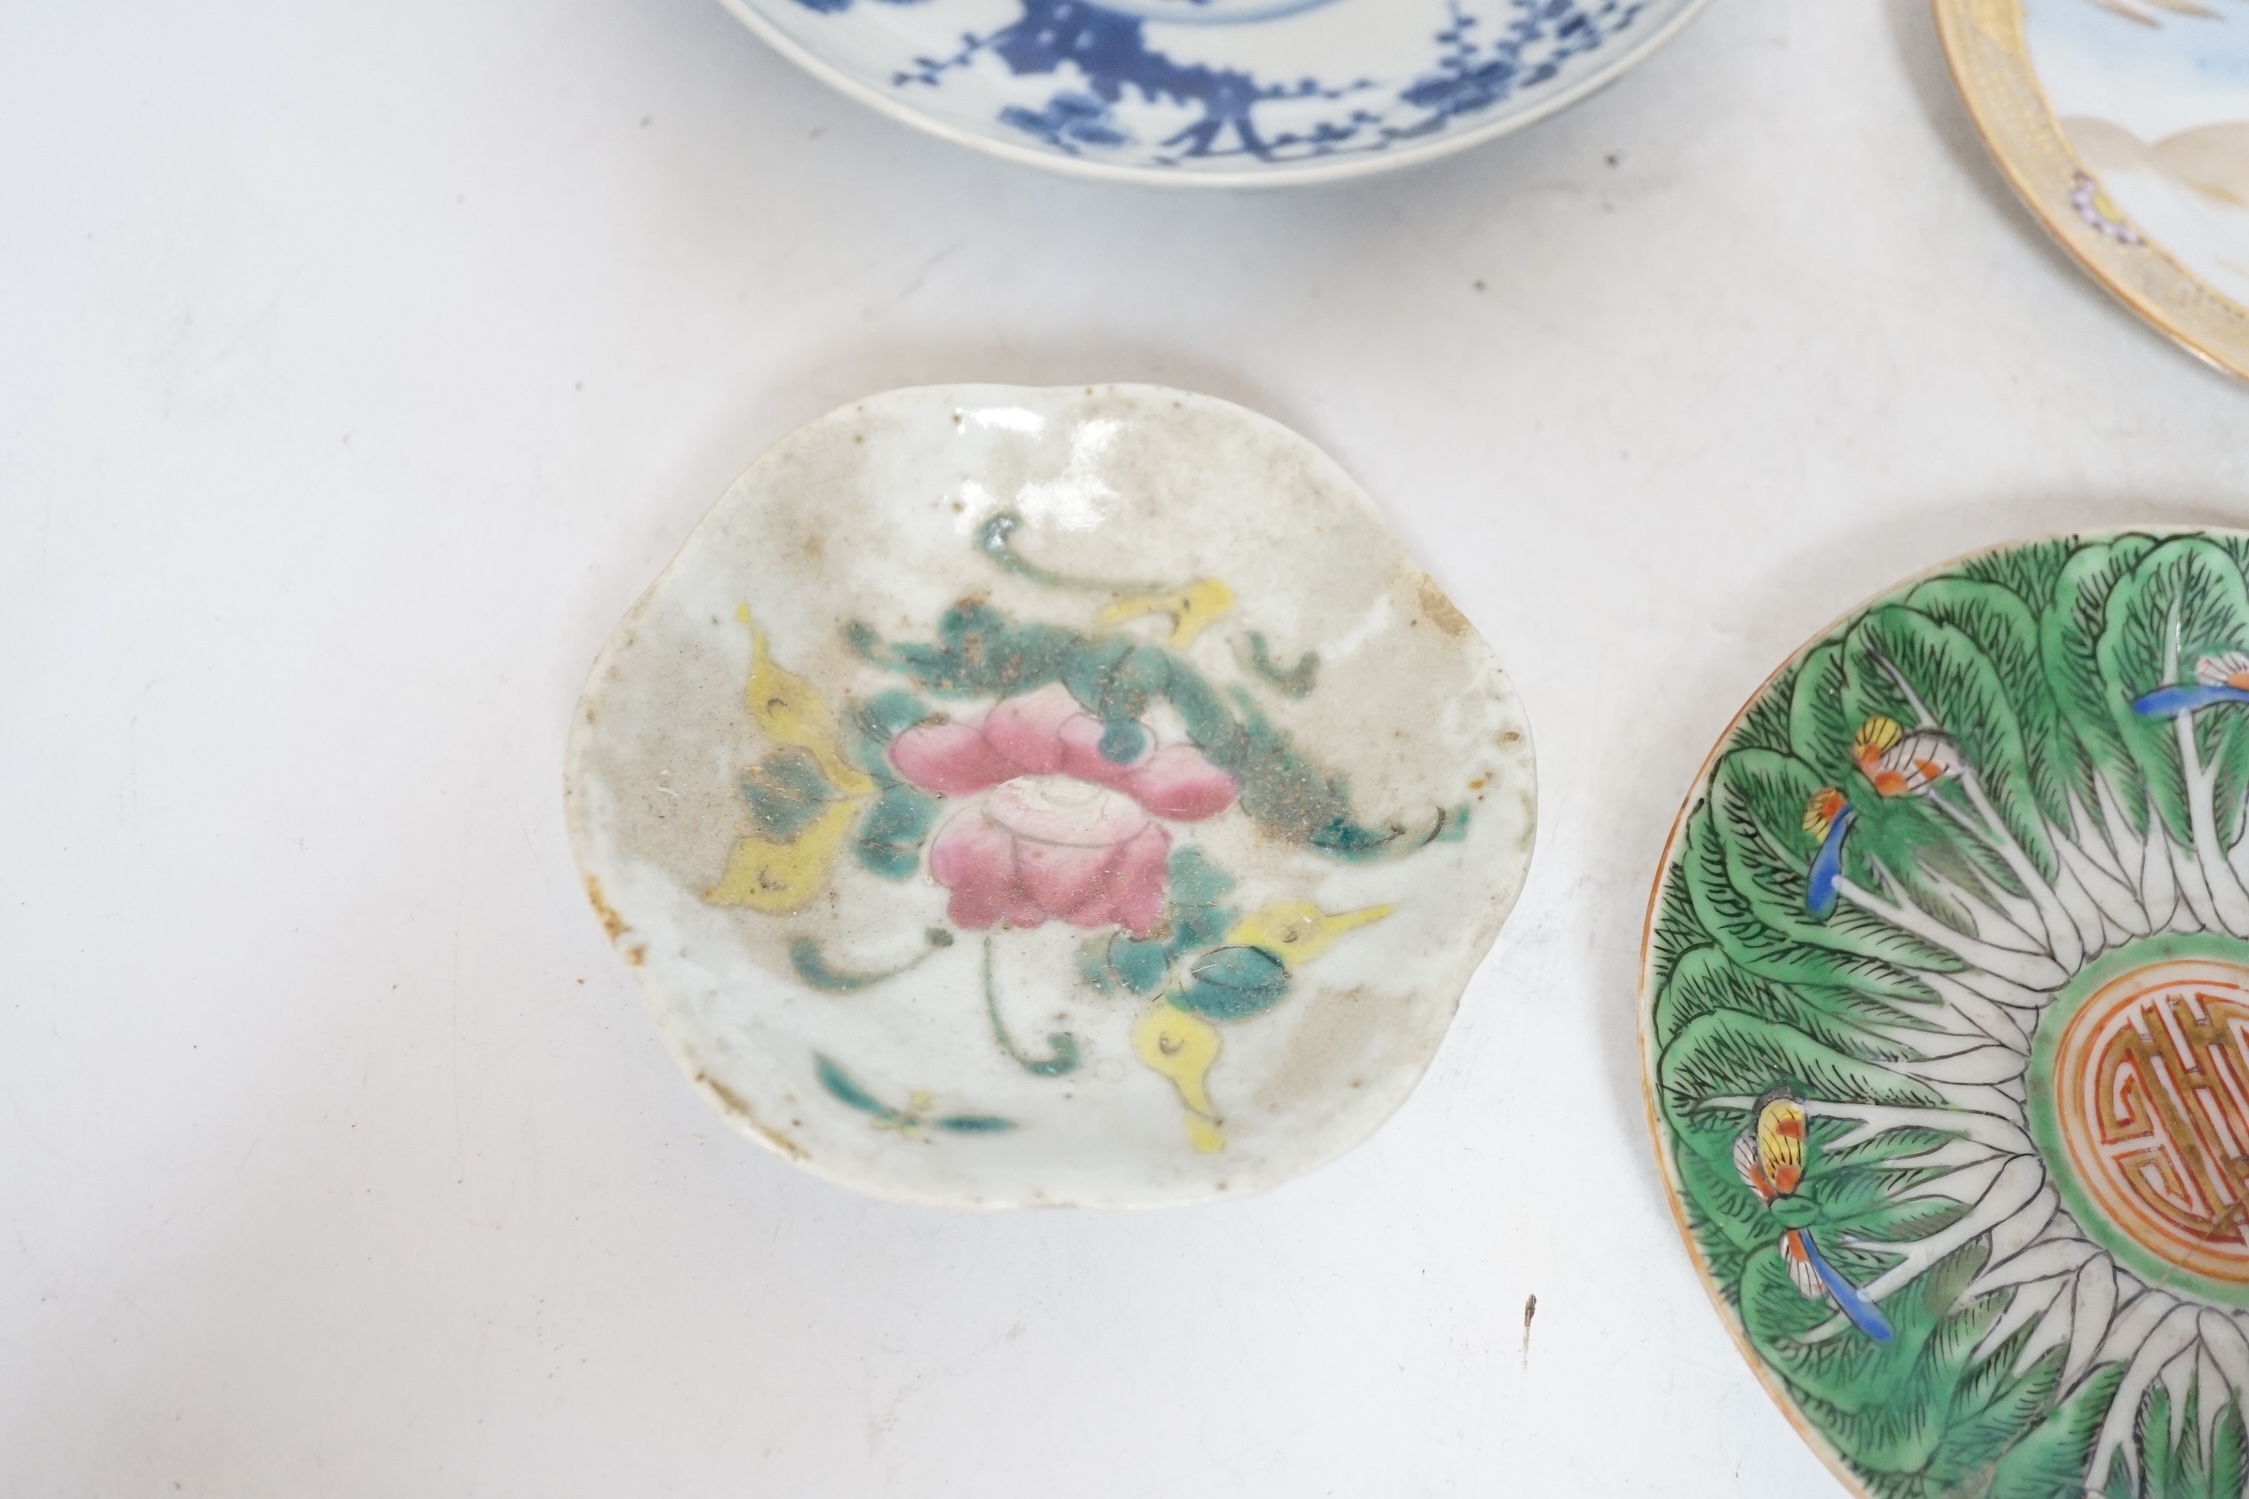 Four Chinese or Japanese porcelain saucers, largest 16.5 cm diameter - Image 5 of 9